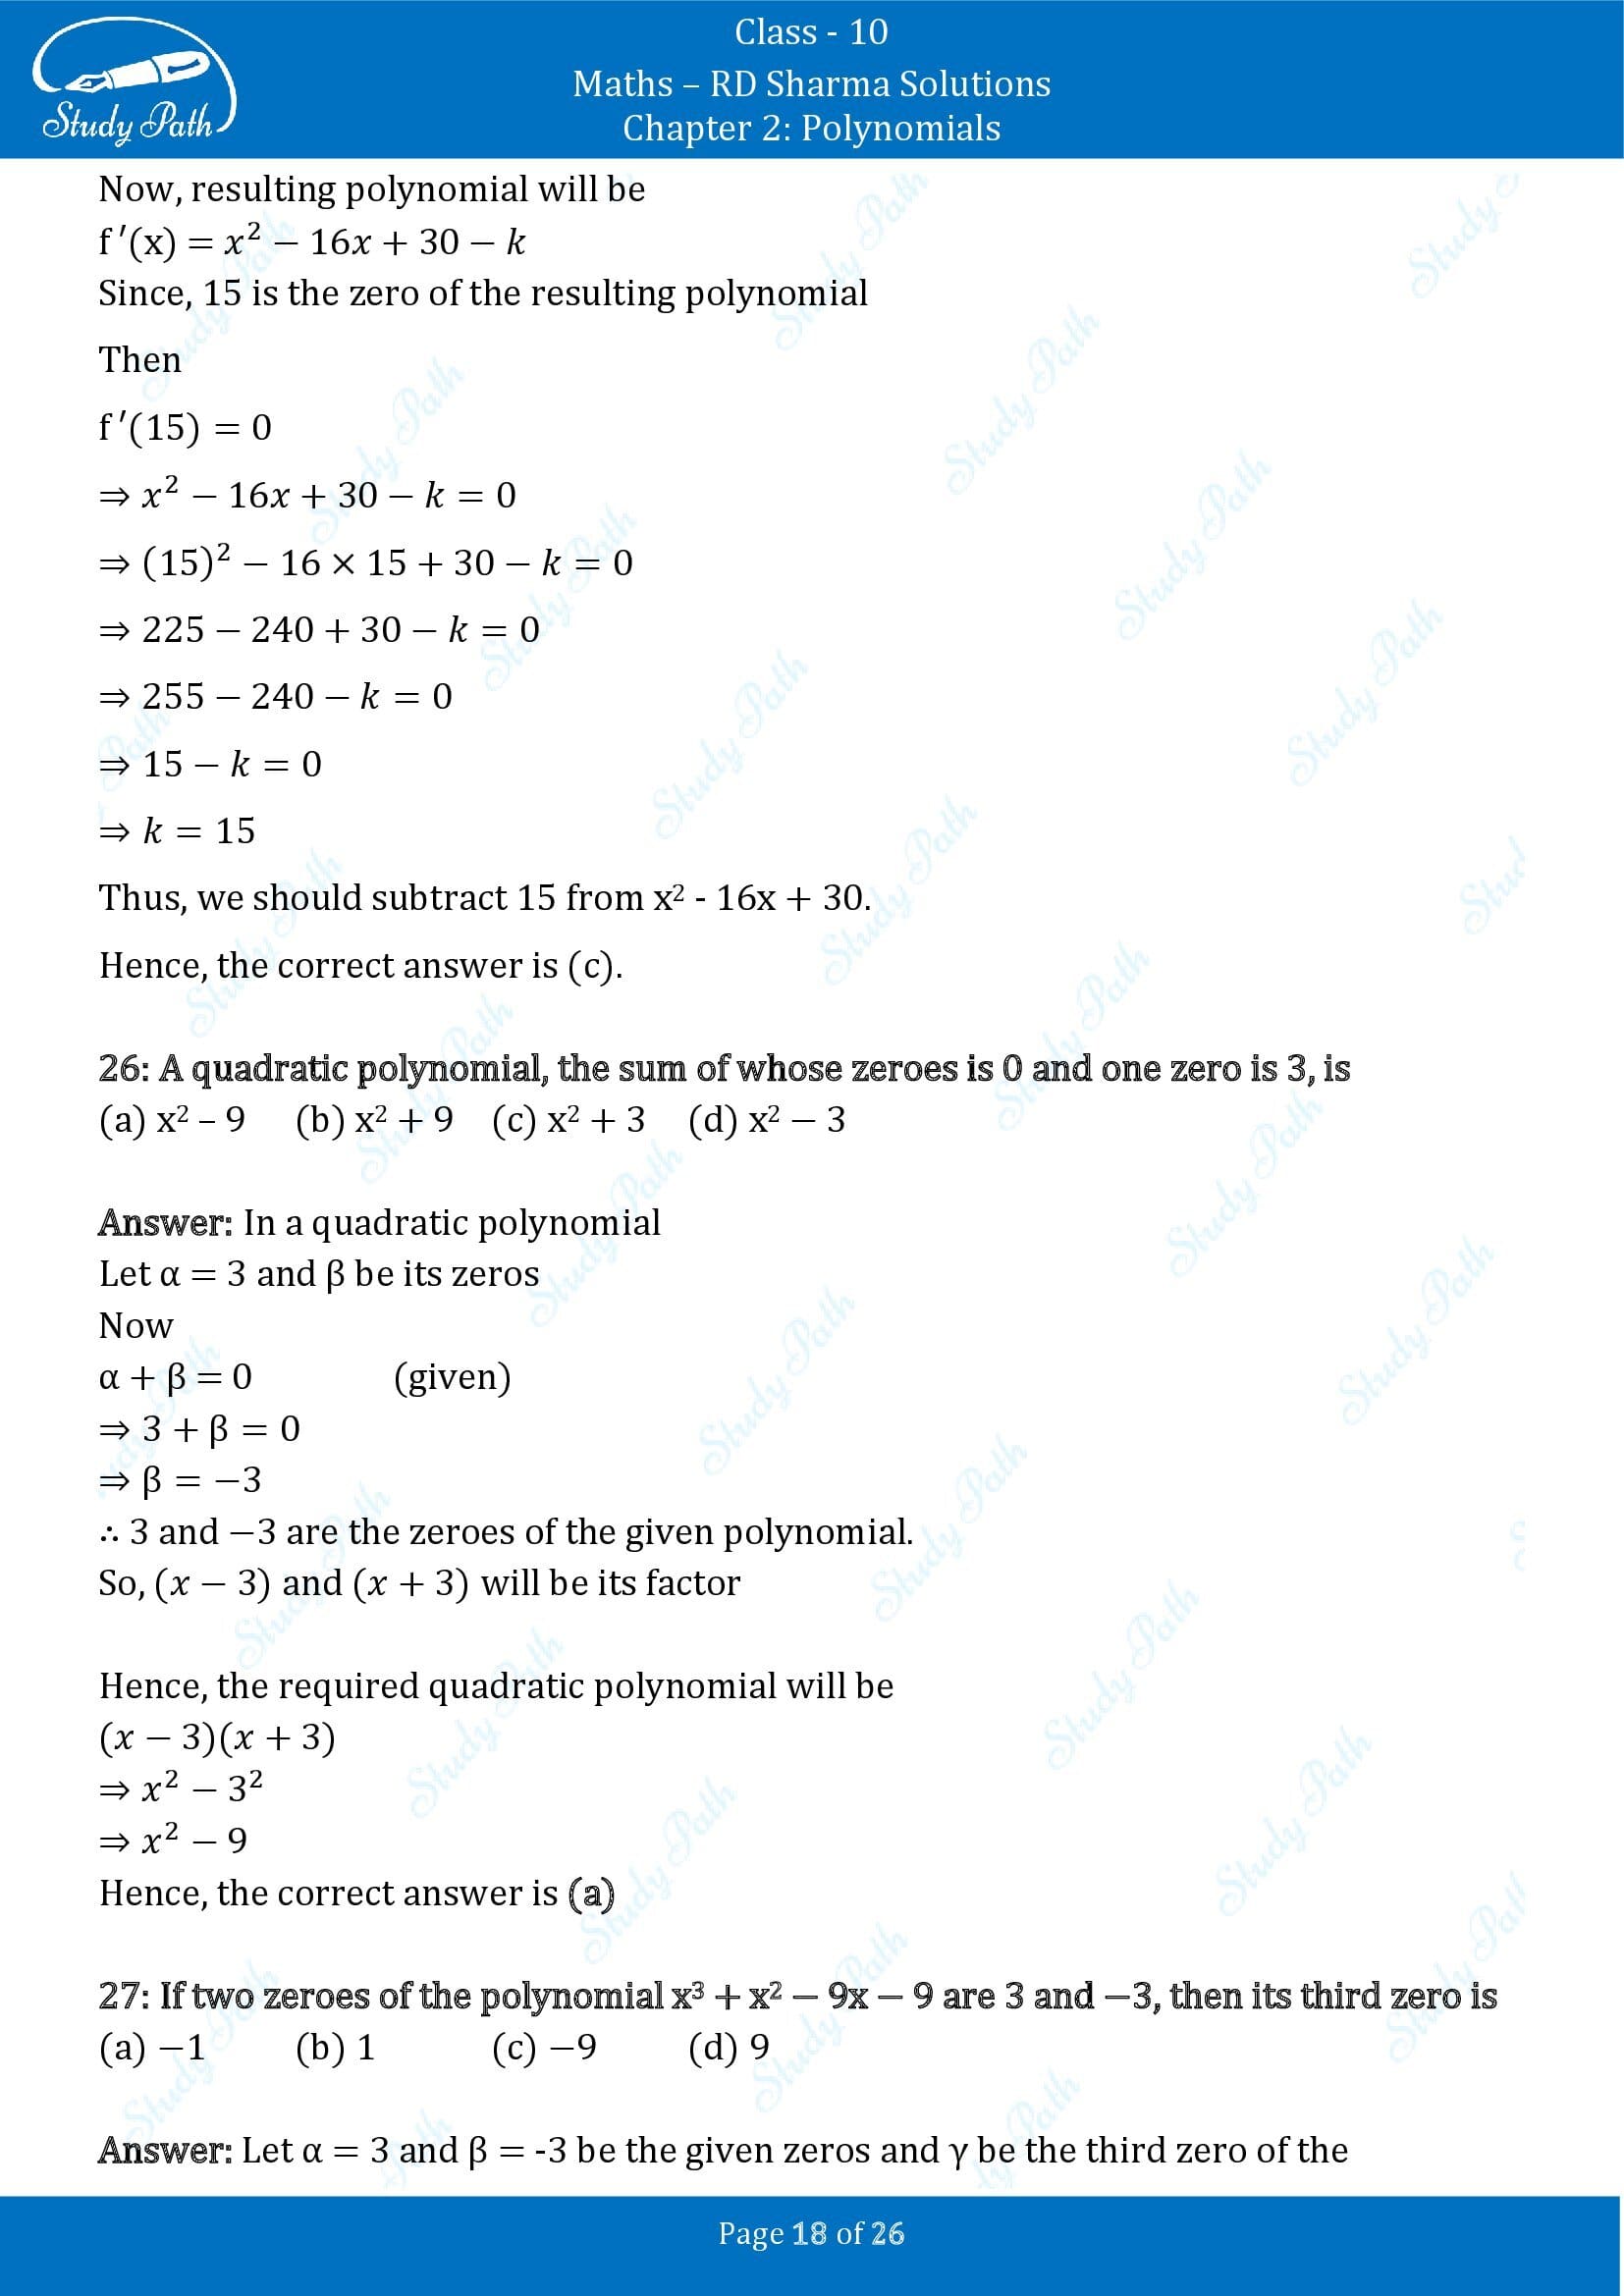 RD Sharma Solutions Class 10 Chapter 2 Polynomials Multiple Choice Questions MCQs 00018